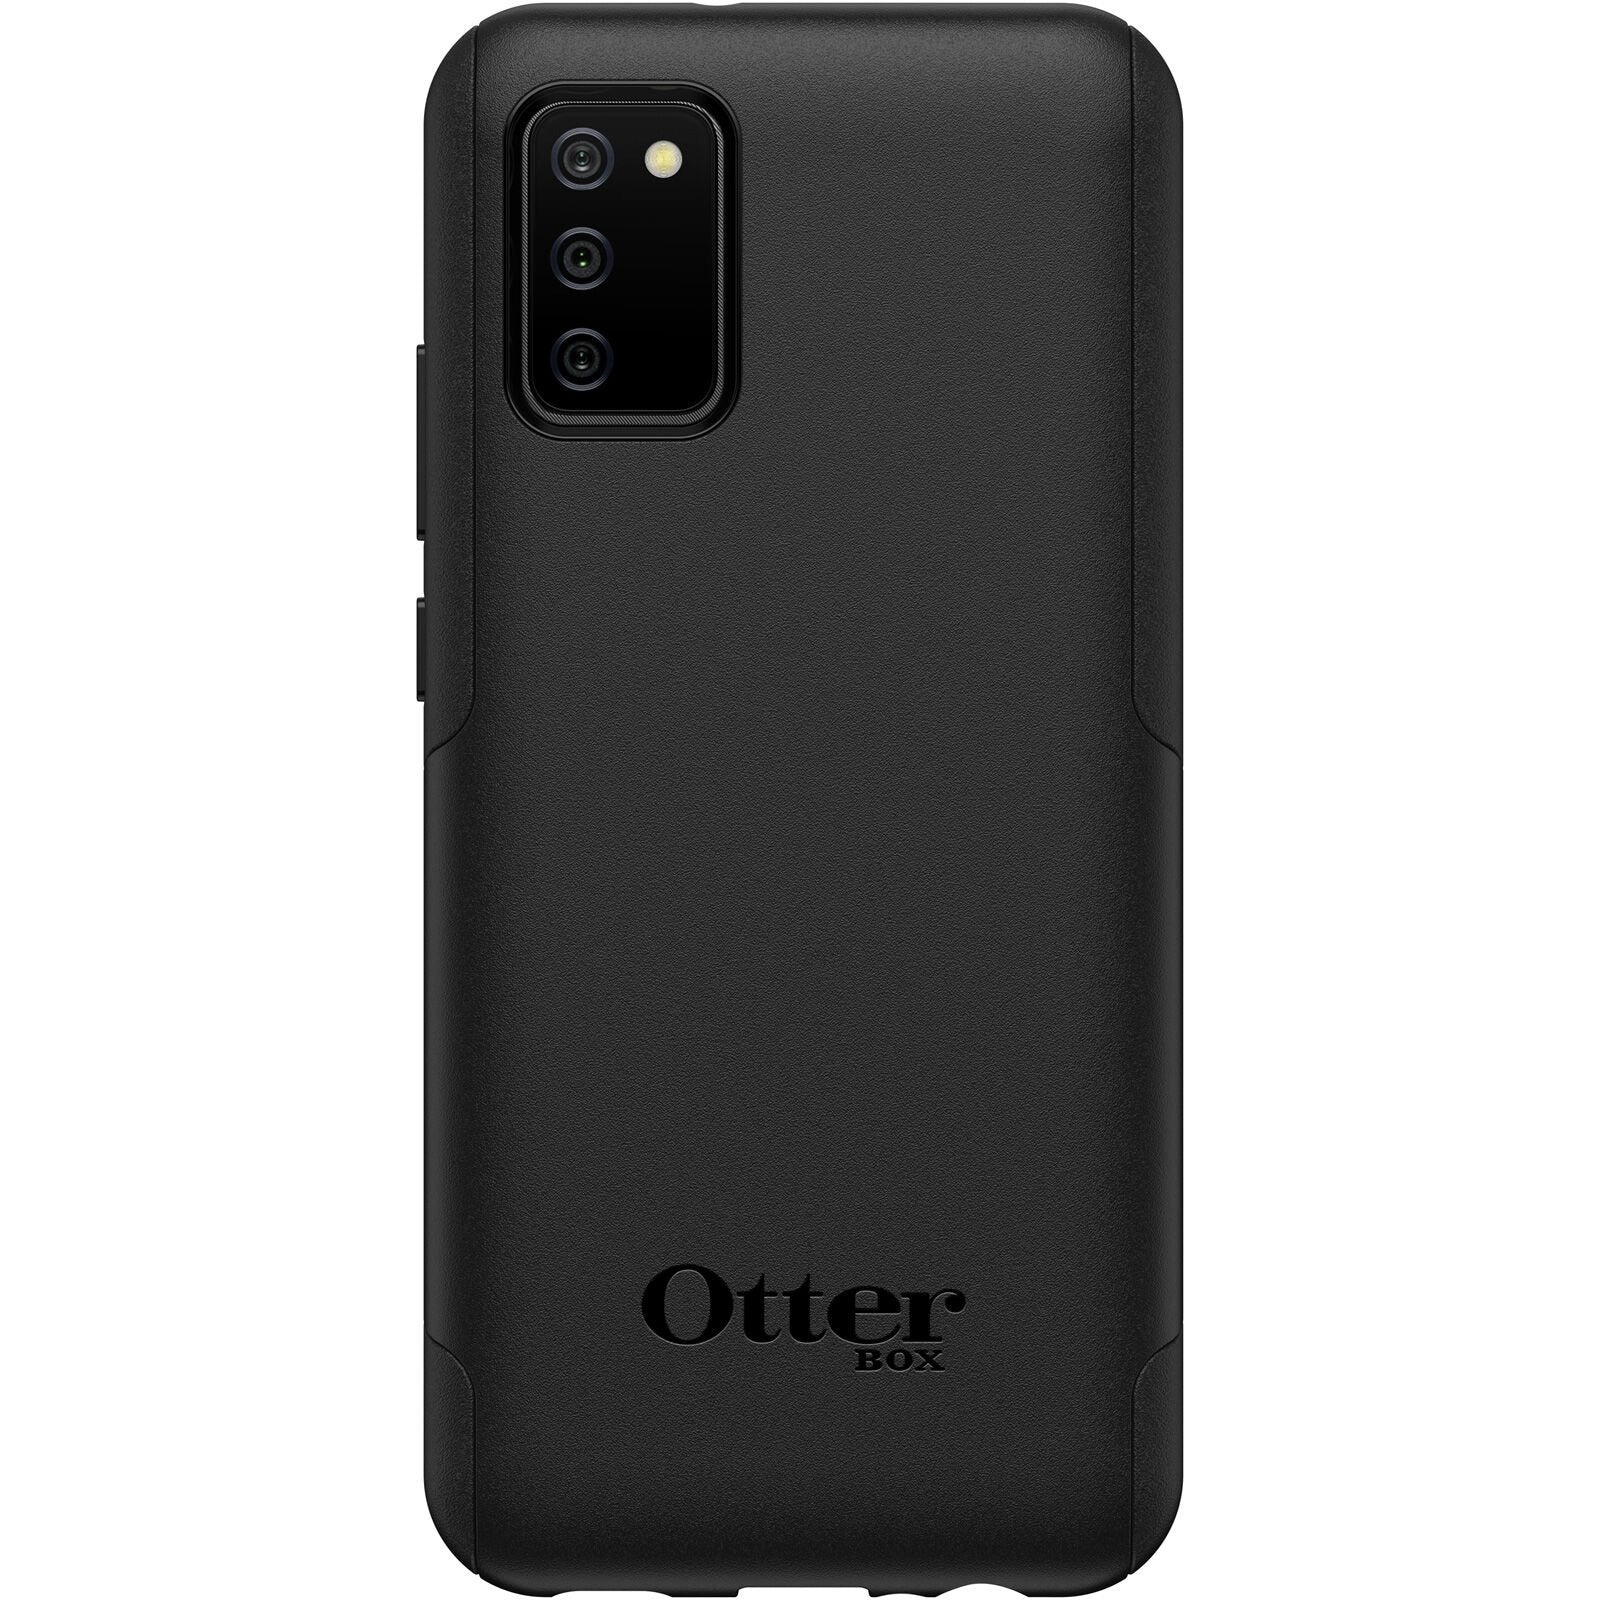 OtterBox COMMUTER LITE Case for Samsung Galaxy A02 - Black (New)